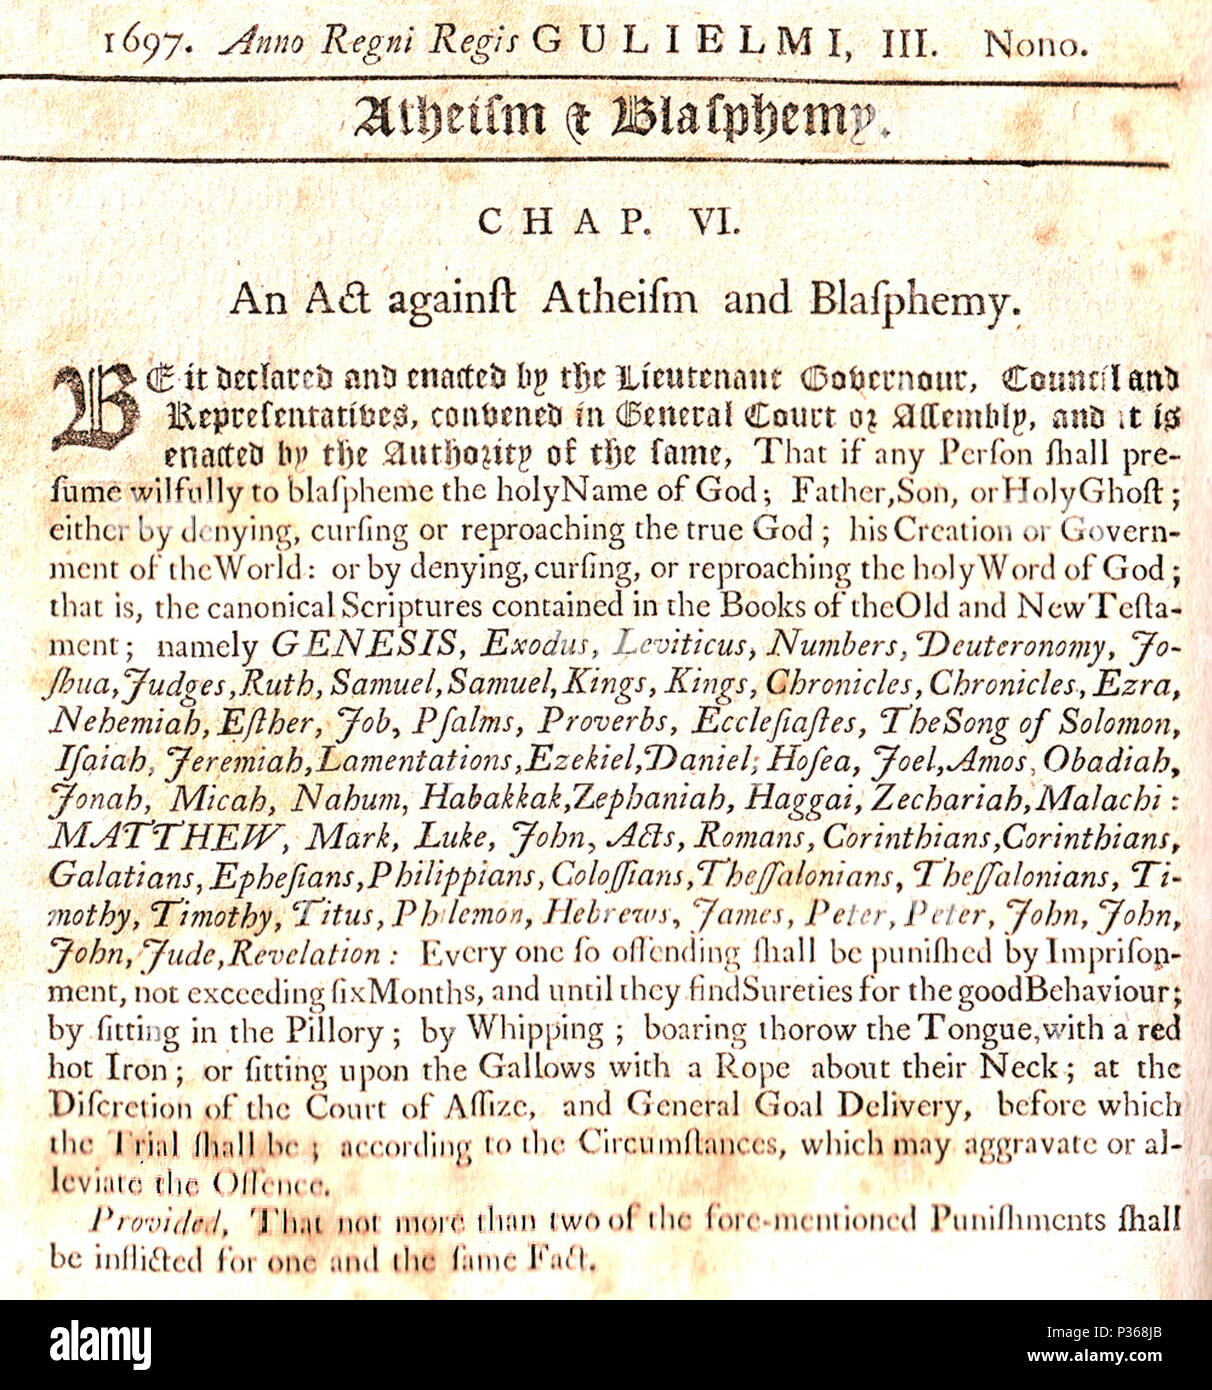 . English: An Act against Atheism and Blasphemy, Massachusetts Bay Colony, 1697 Transcription: 1697. Anno Regni Regis G U L I E L M I, III Nono. Atheism & Blasphemy C H A P. VI An Act against Atheism and Blasphemy. BE it declared and enacted by the Lieutenant Governor, Council and Representatives, convened in General Assembly, and it is enacted by the Authority of the same, That if any Person shall presume willfully to blaspheme the holy Name of God, Father, Son, or Holy Ghost; either by denying, cursing or reproaching the true God; his Creation or Government of the World: or by denying, cursi Stock Photo